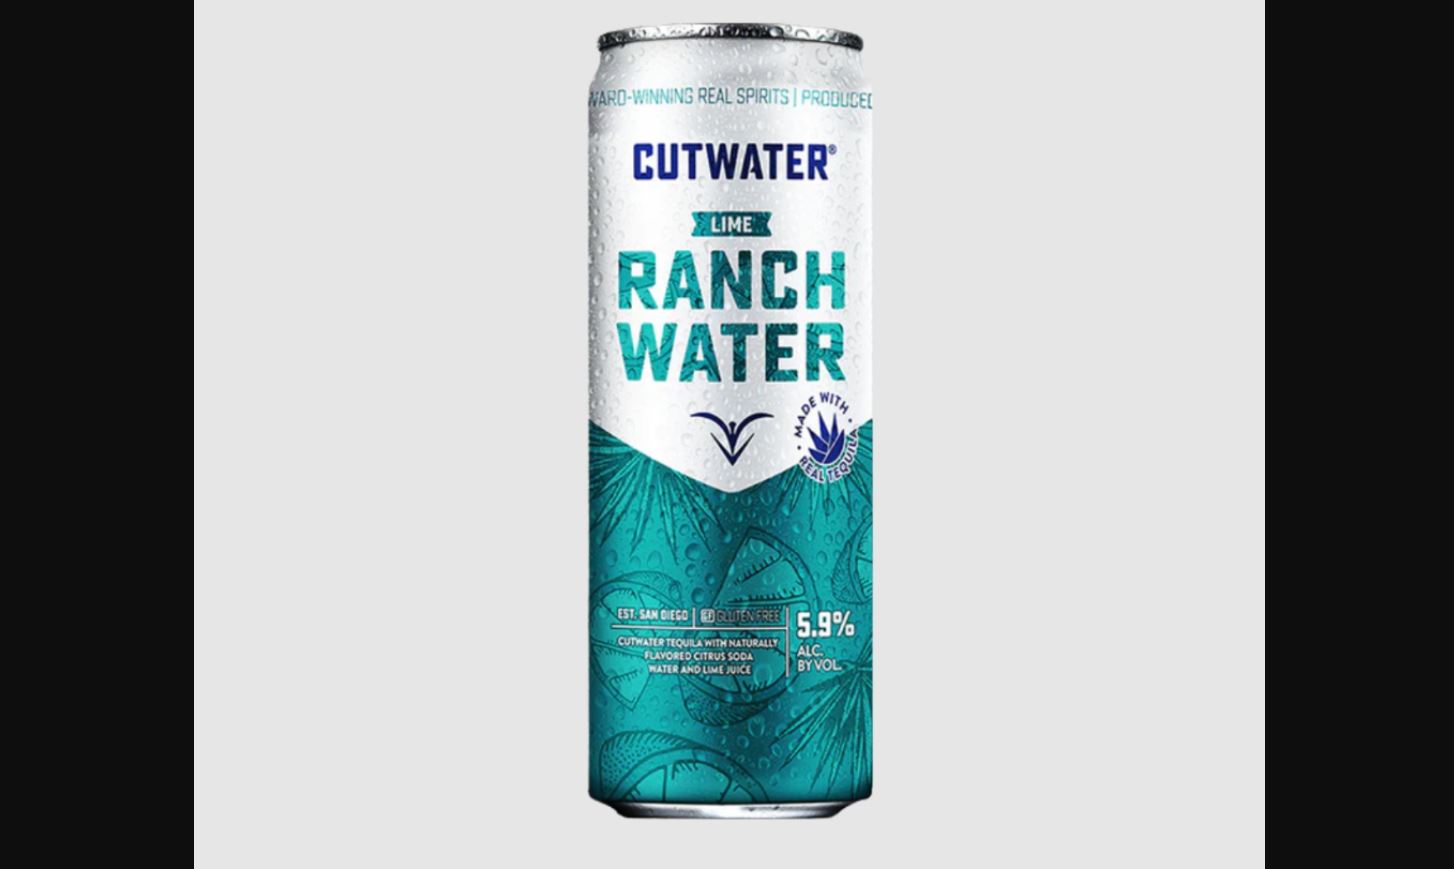 Cutwater Ranch Water Lime